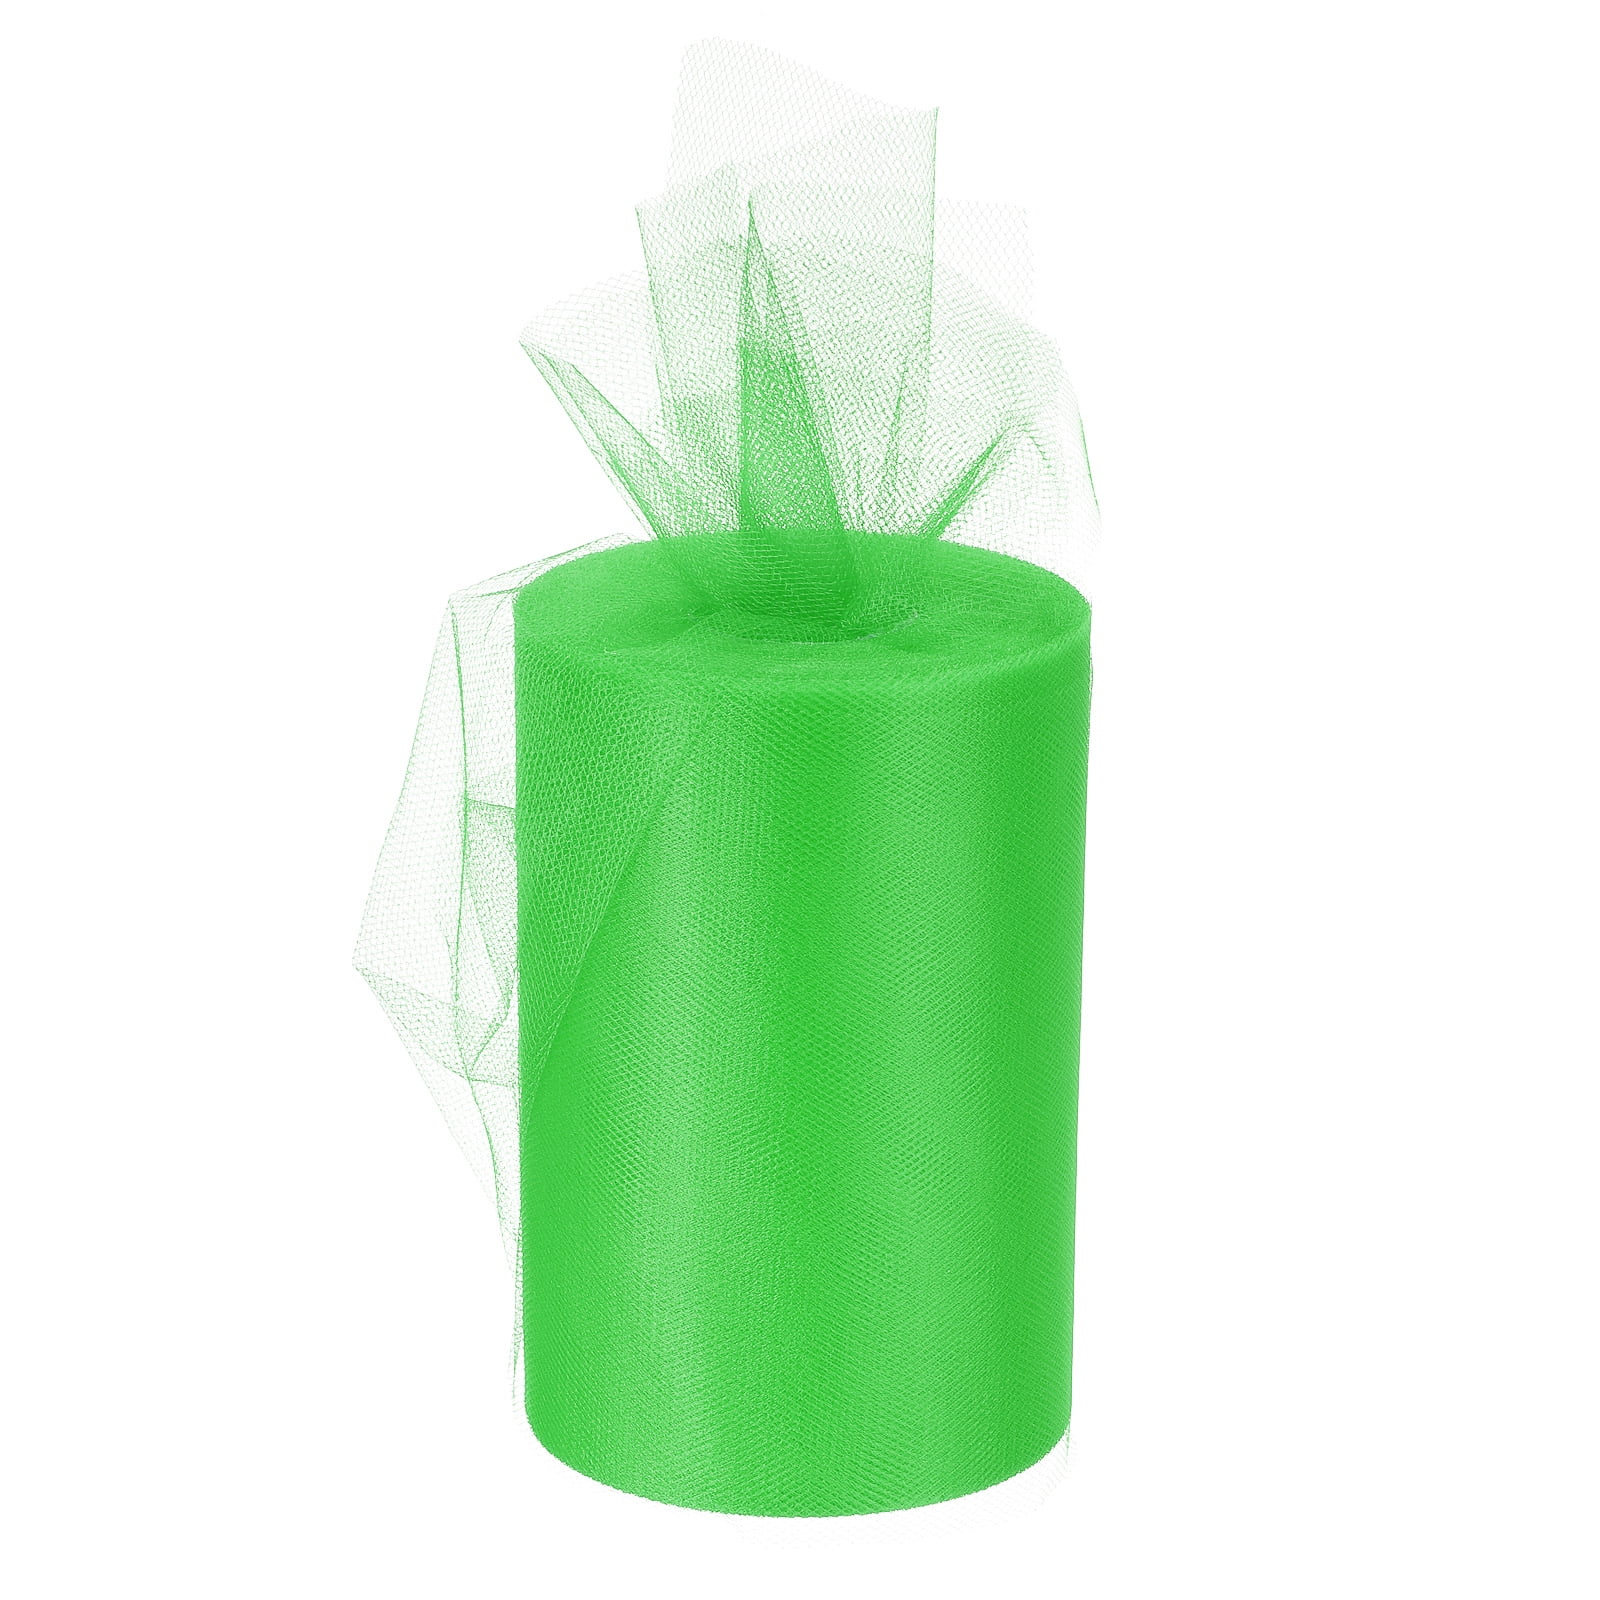 Uxcell Tulle Rolls Fabric Spools 6 100 Yards Lime Green for Decoration  Wrapping Wedding DIY Crafts 